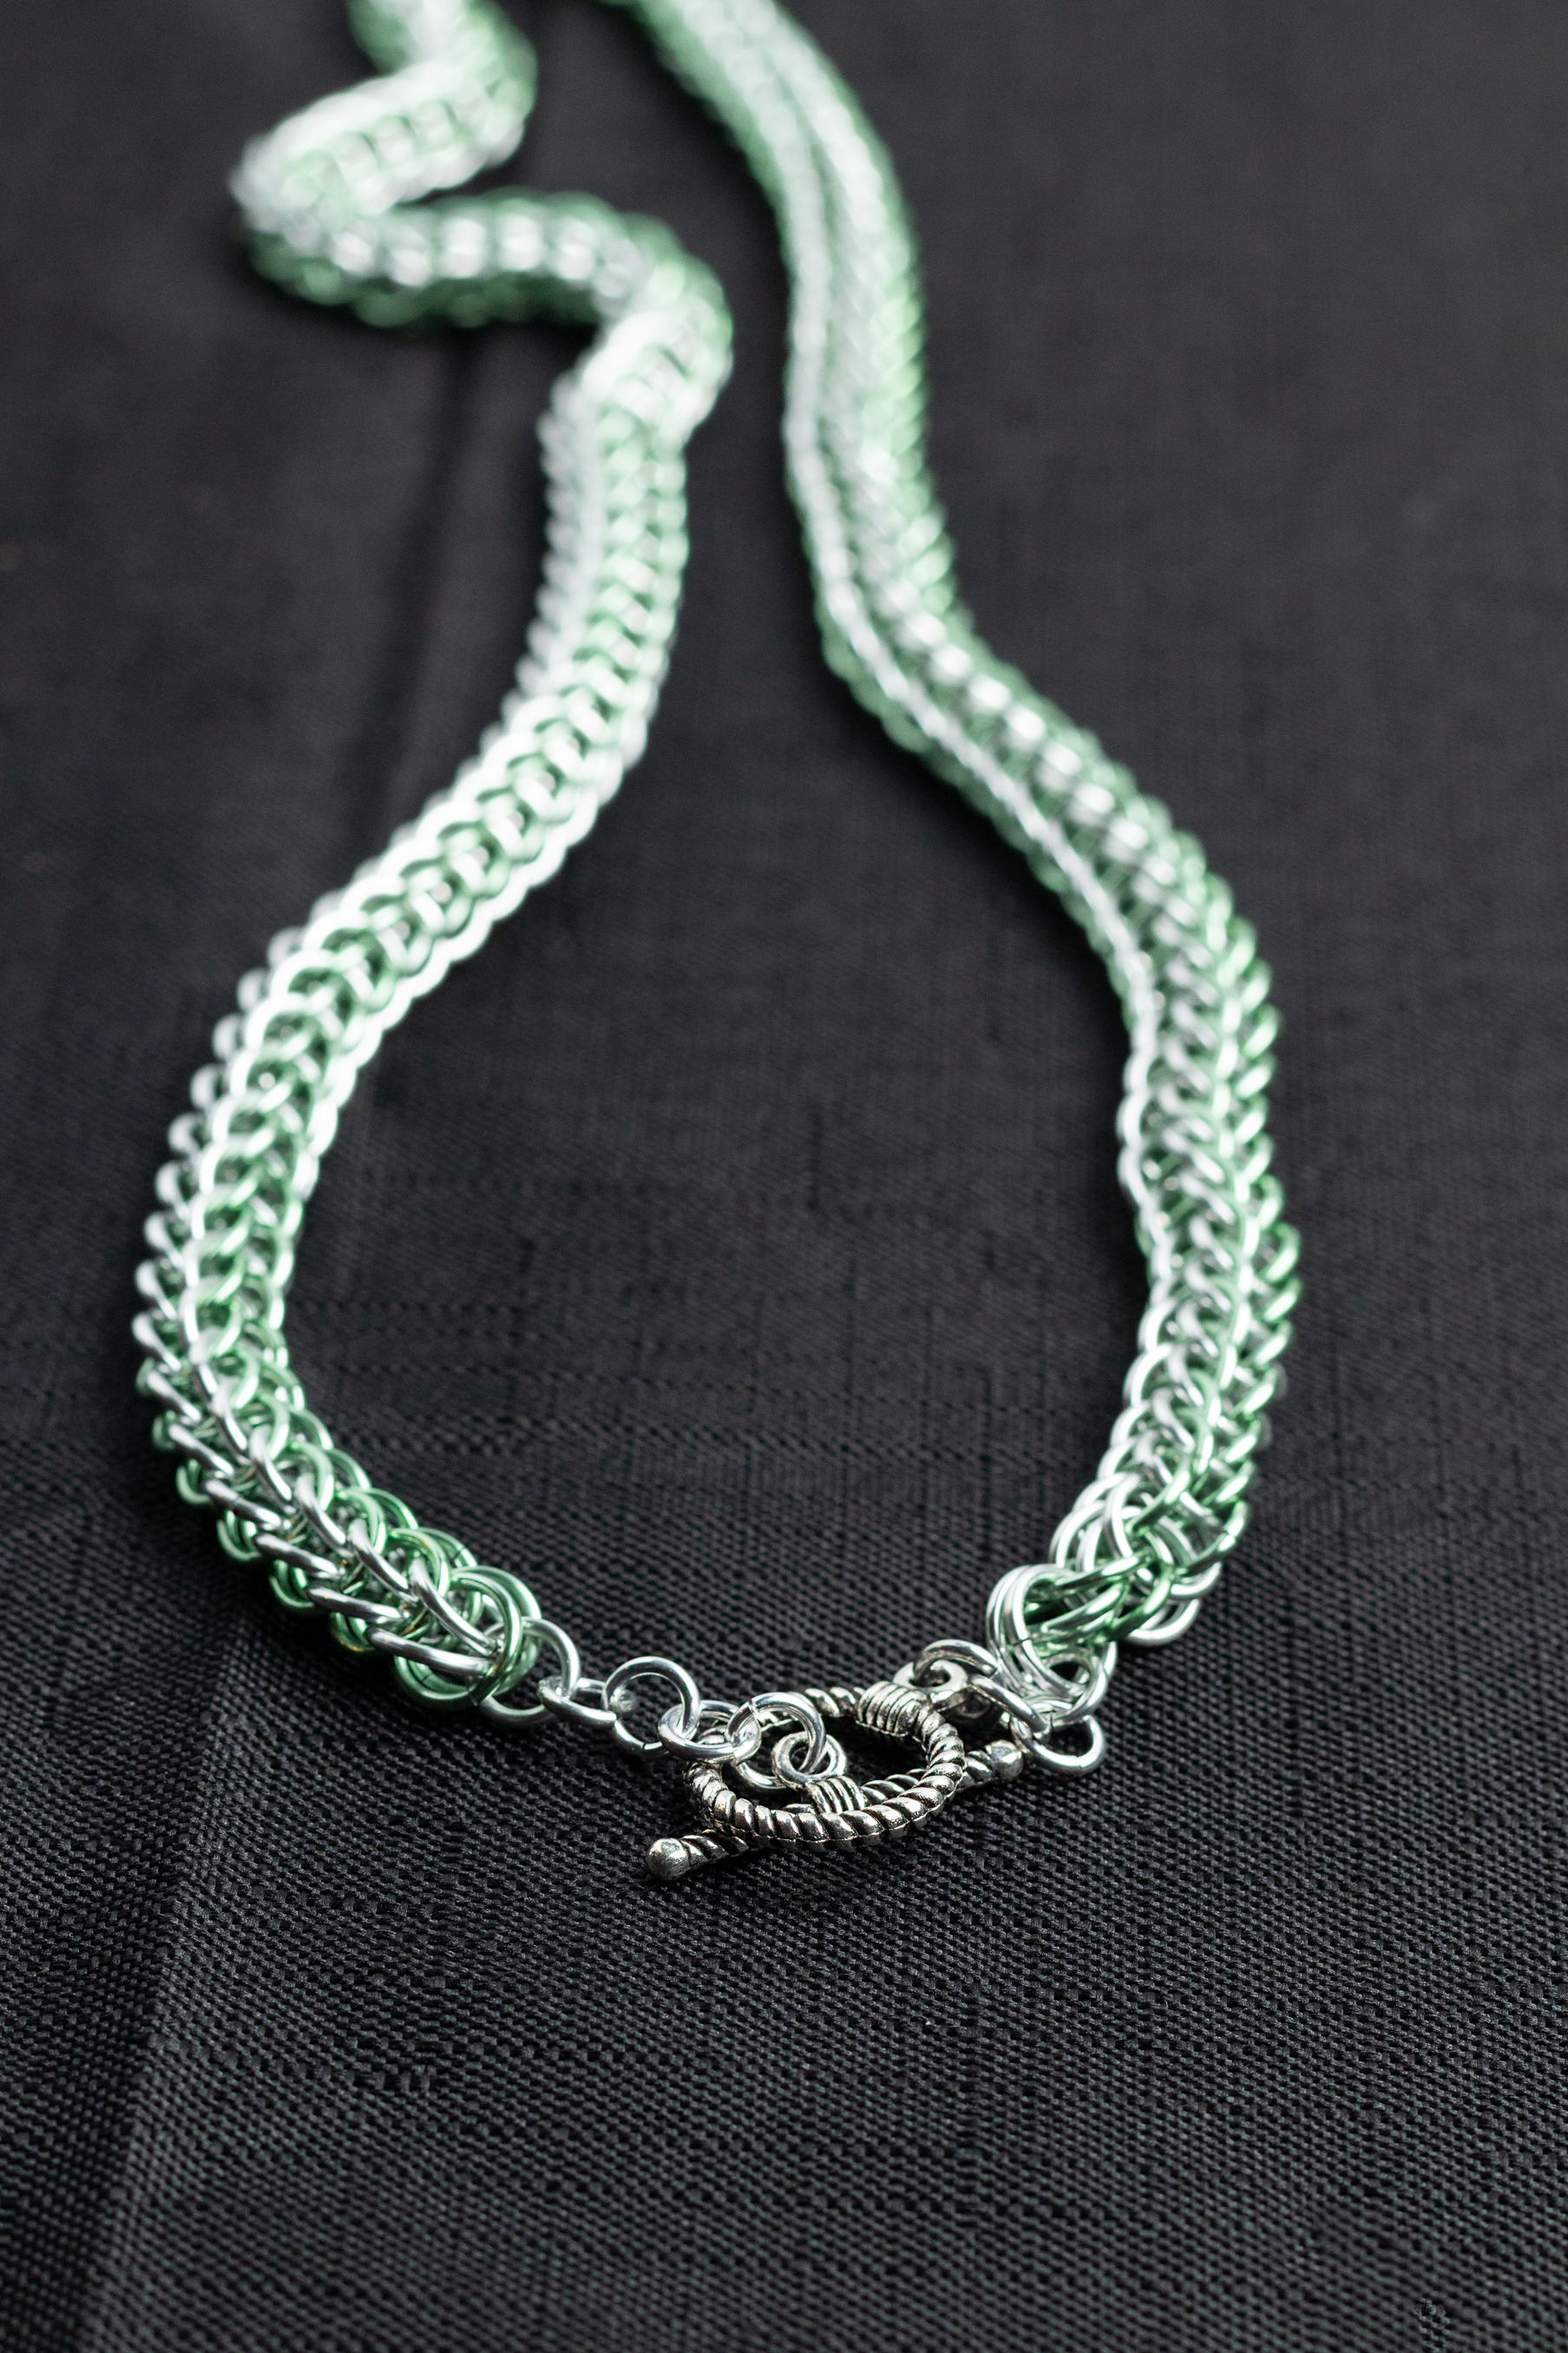 Silver and green chain necklace on a black background.